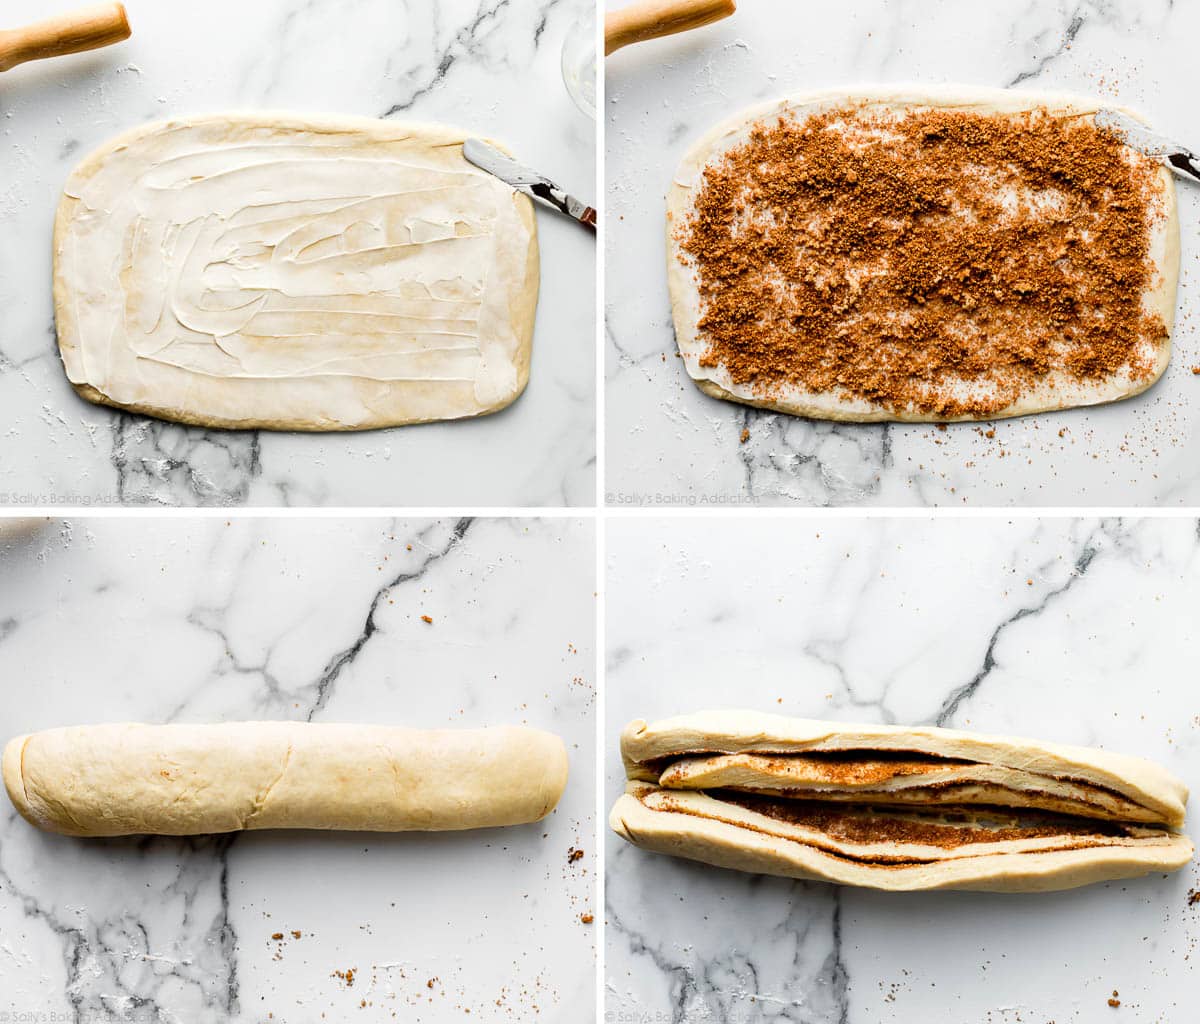 4 photos showing the shaping steps of cinnamon twisted bread